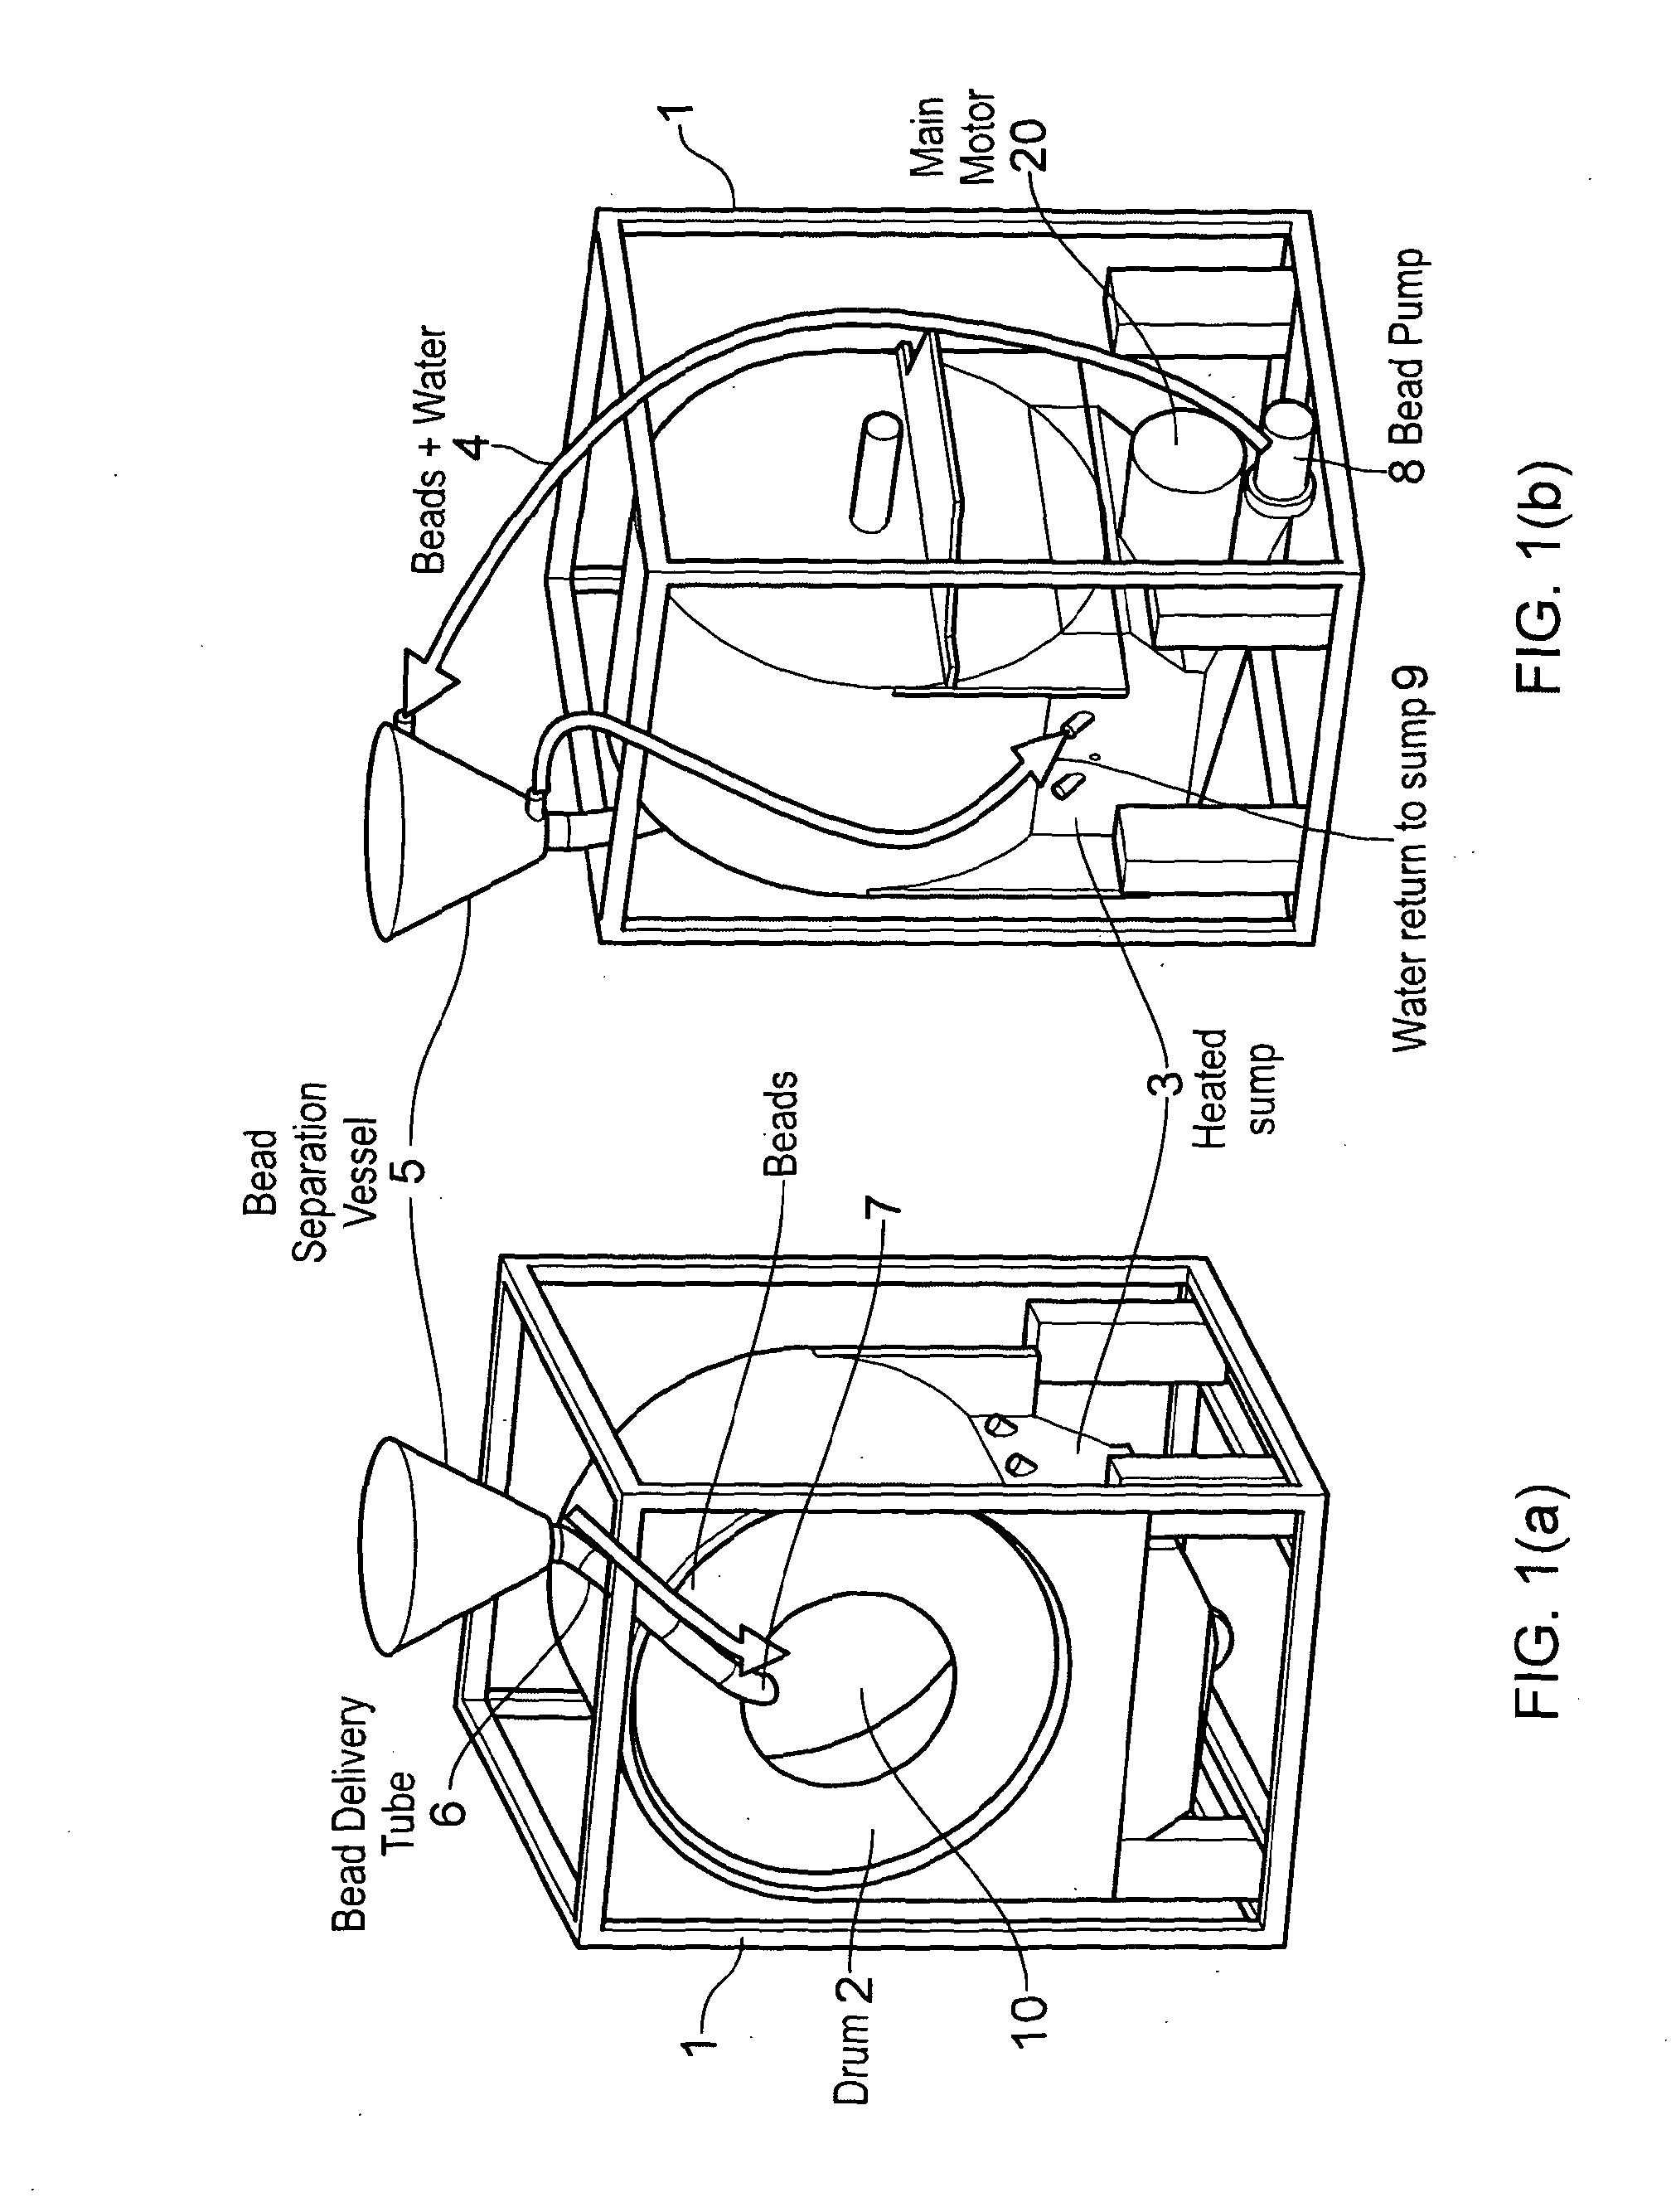 Cleaning Apparatus and Method